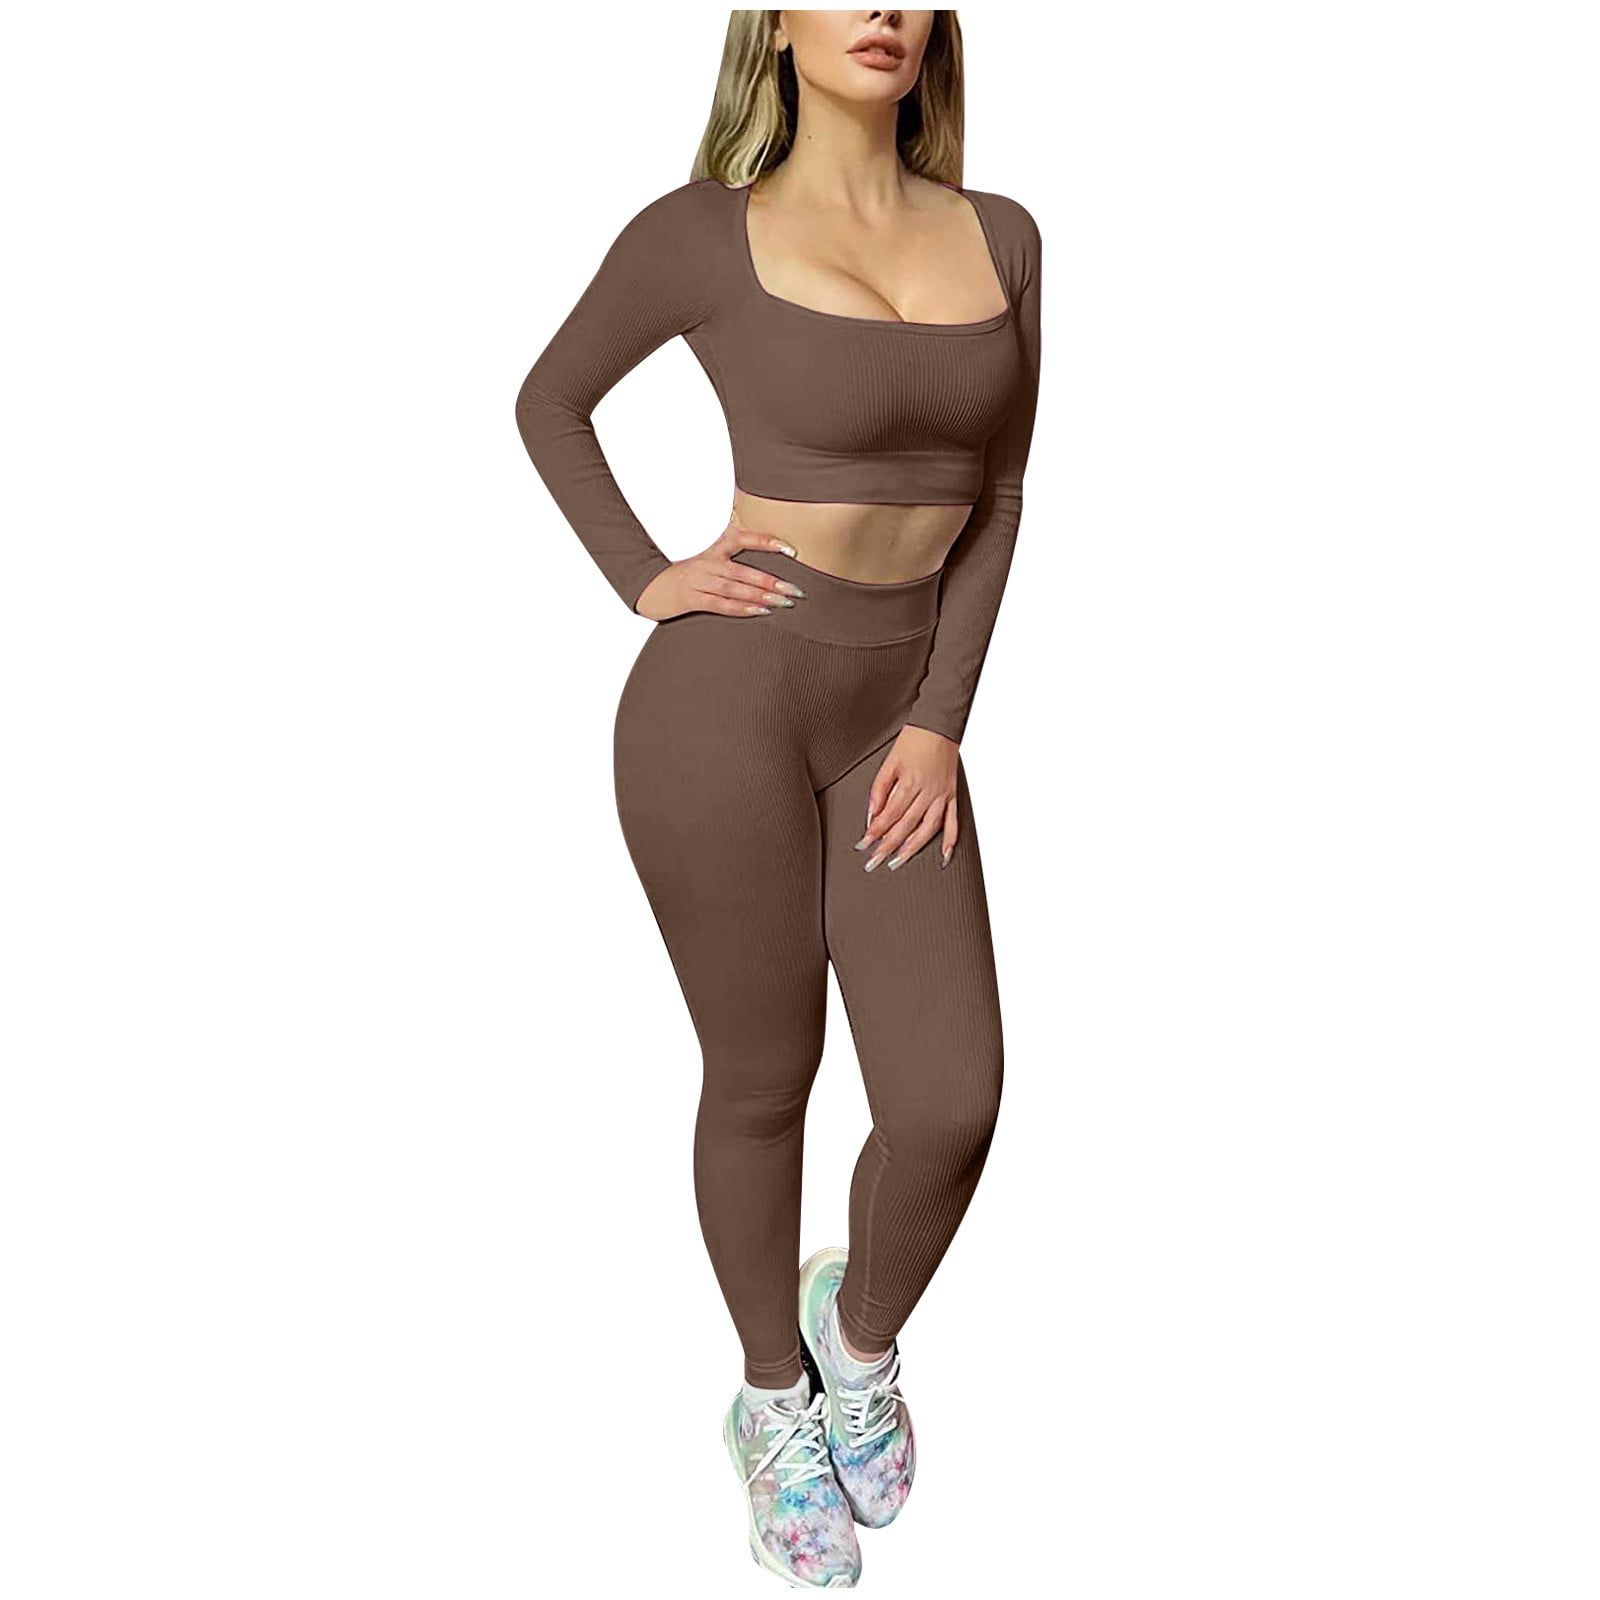  Two Piece Outfits For Women Sexy Sweatsuits Sets